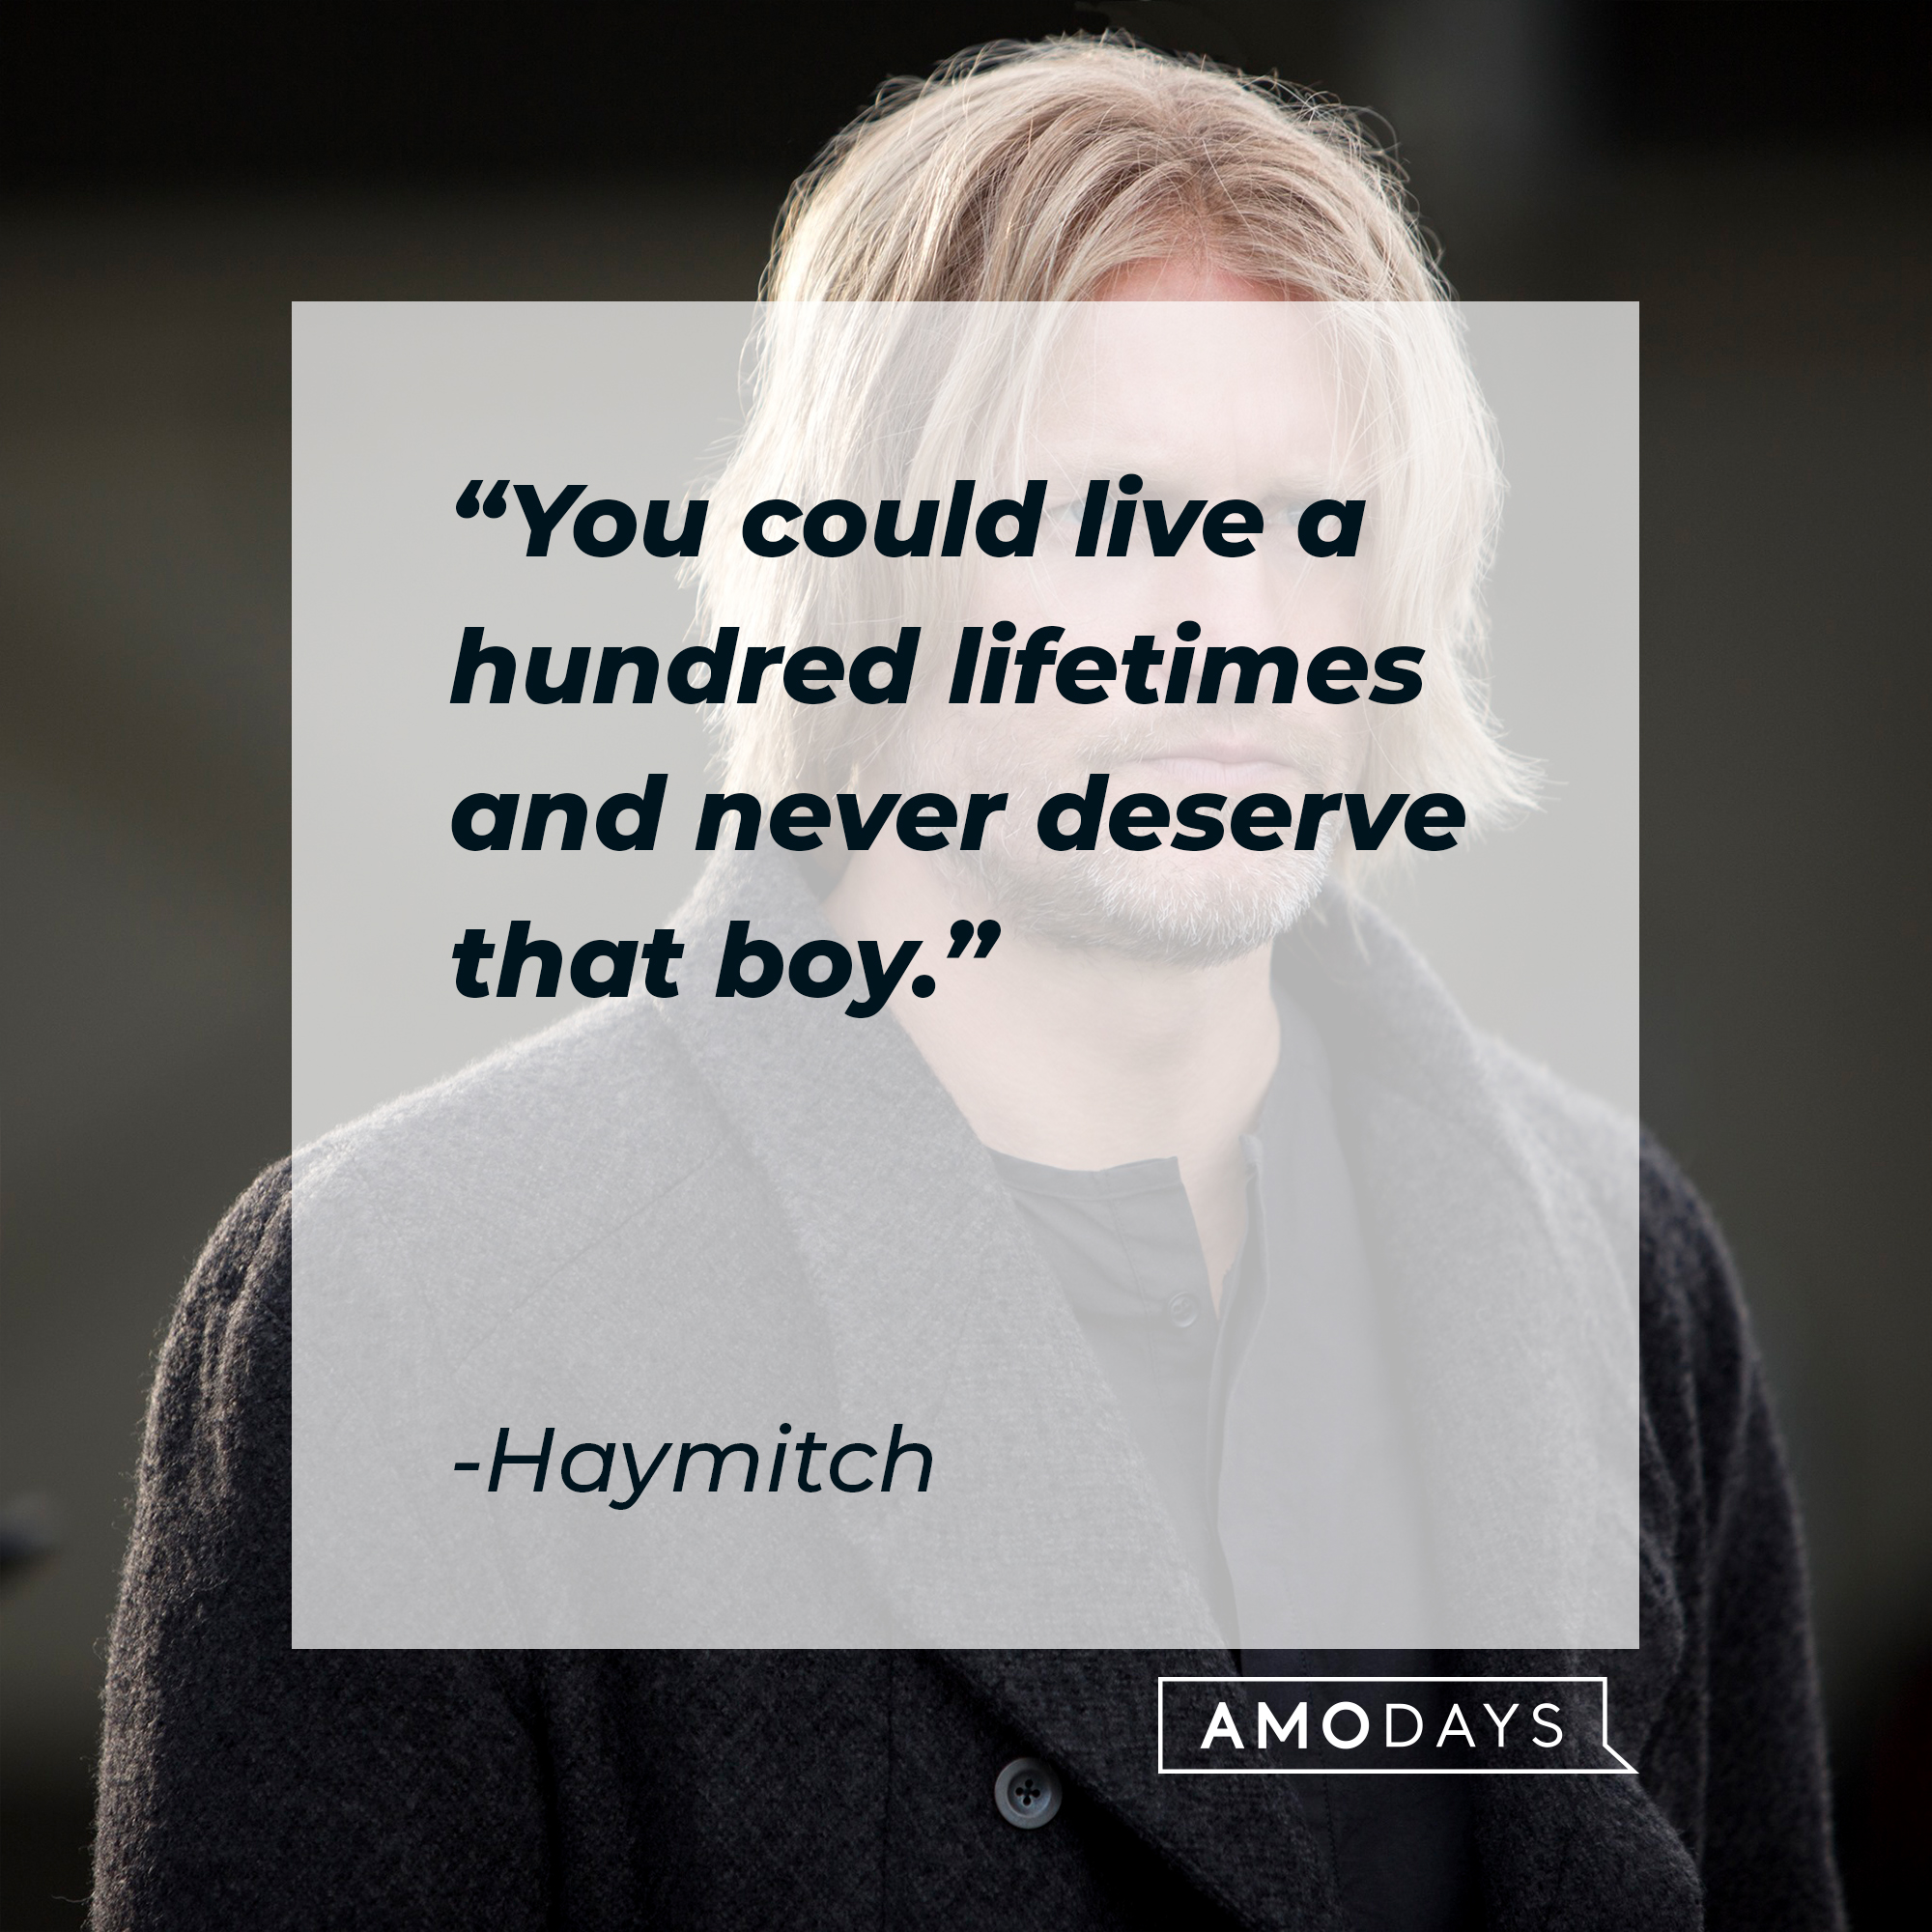 Haymitch's quote: “You could live a hundred lifetimes and never deserve that boy." | Source: facebook.com/TheHungerGamesMovie